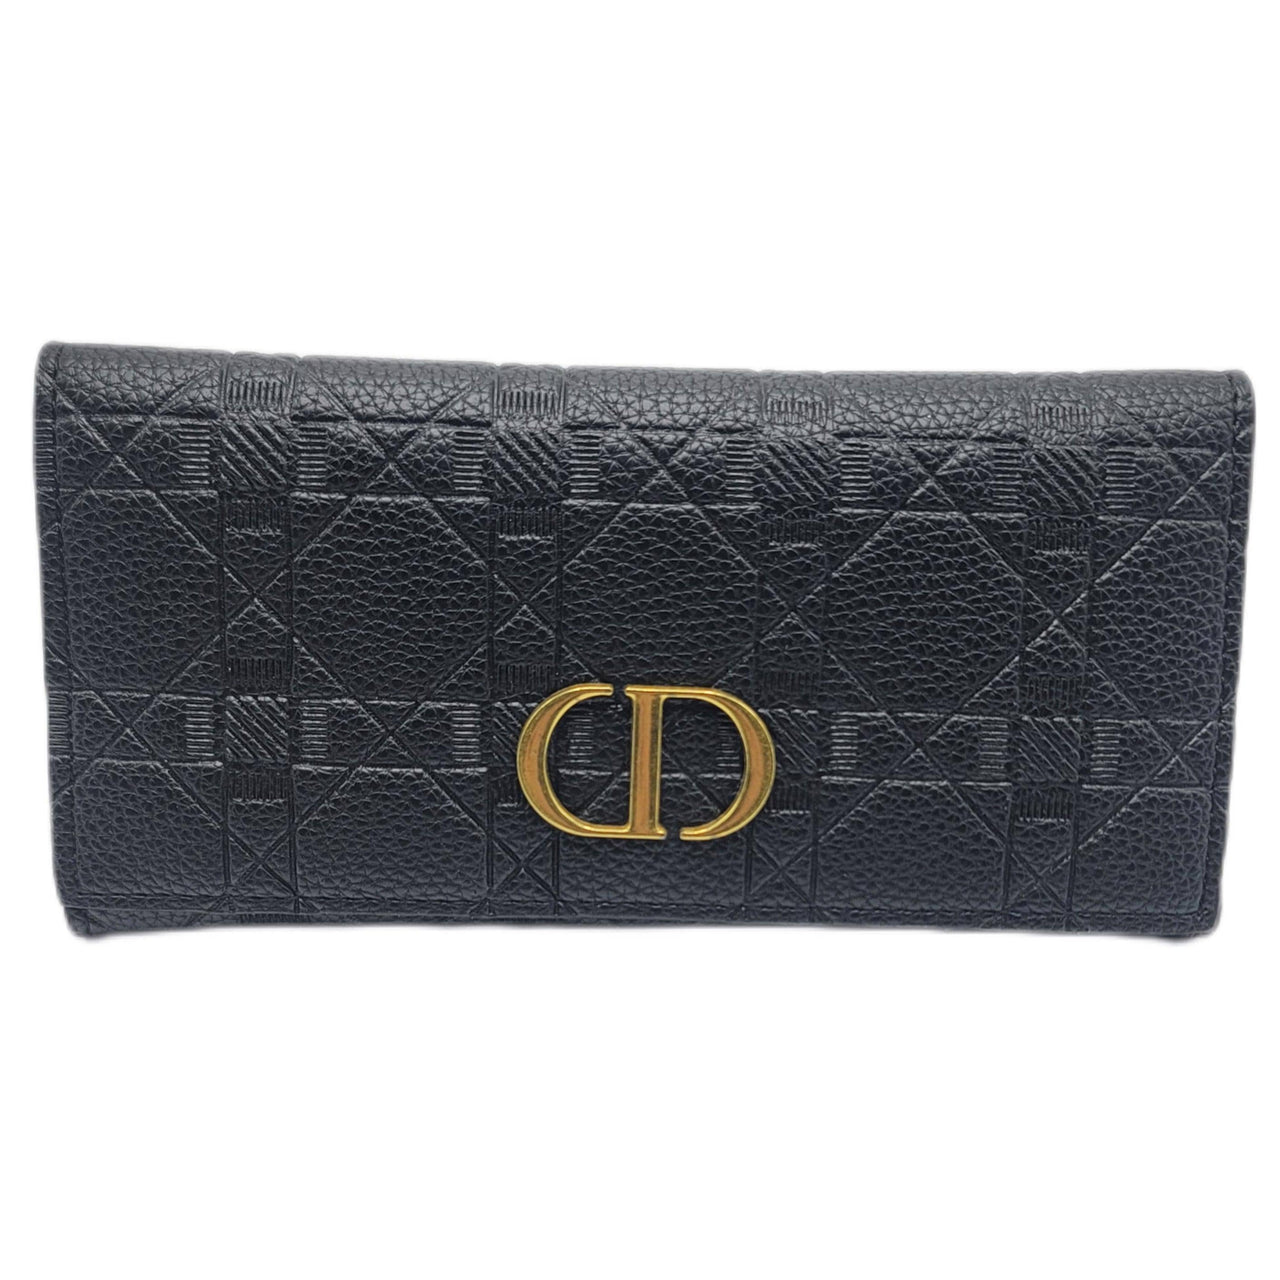 The Bag Couture Luggage & Bags Christian Dior 3 Fold Wallet Black